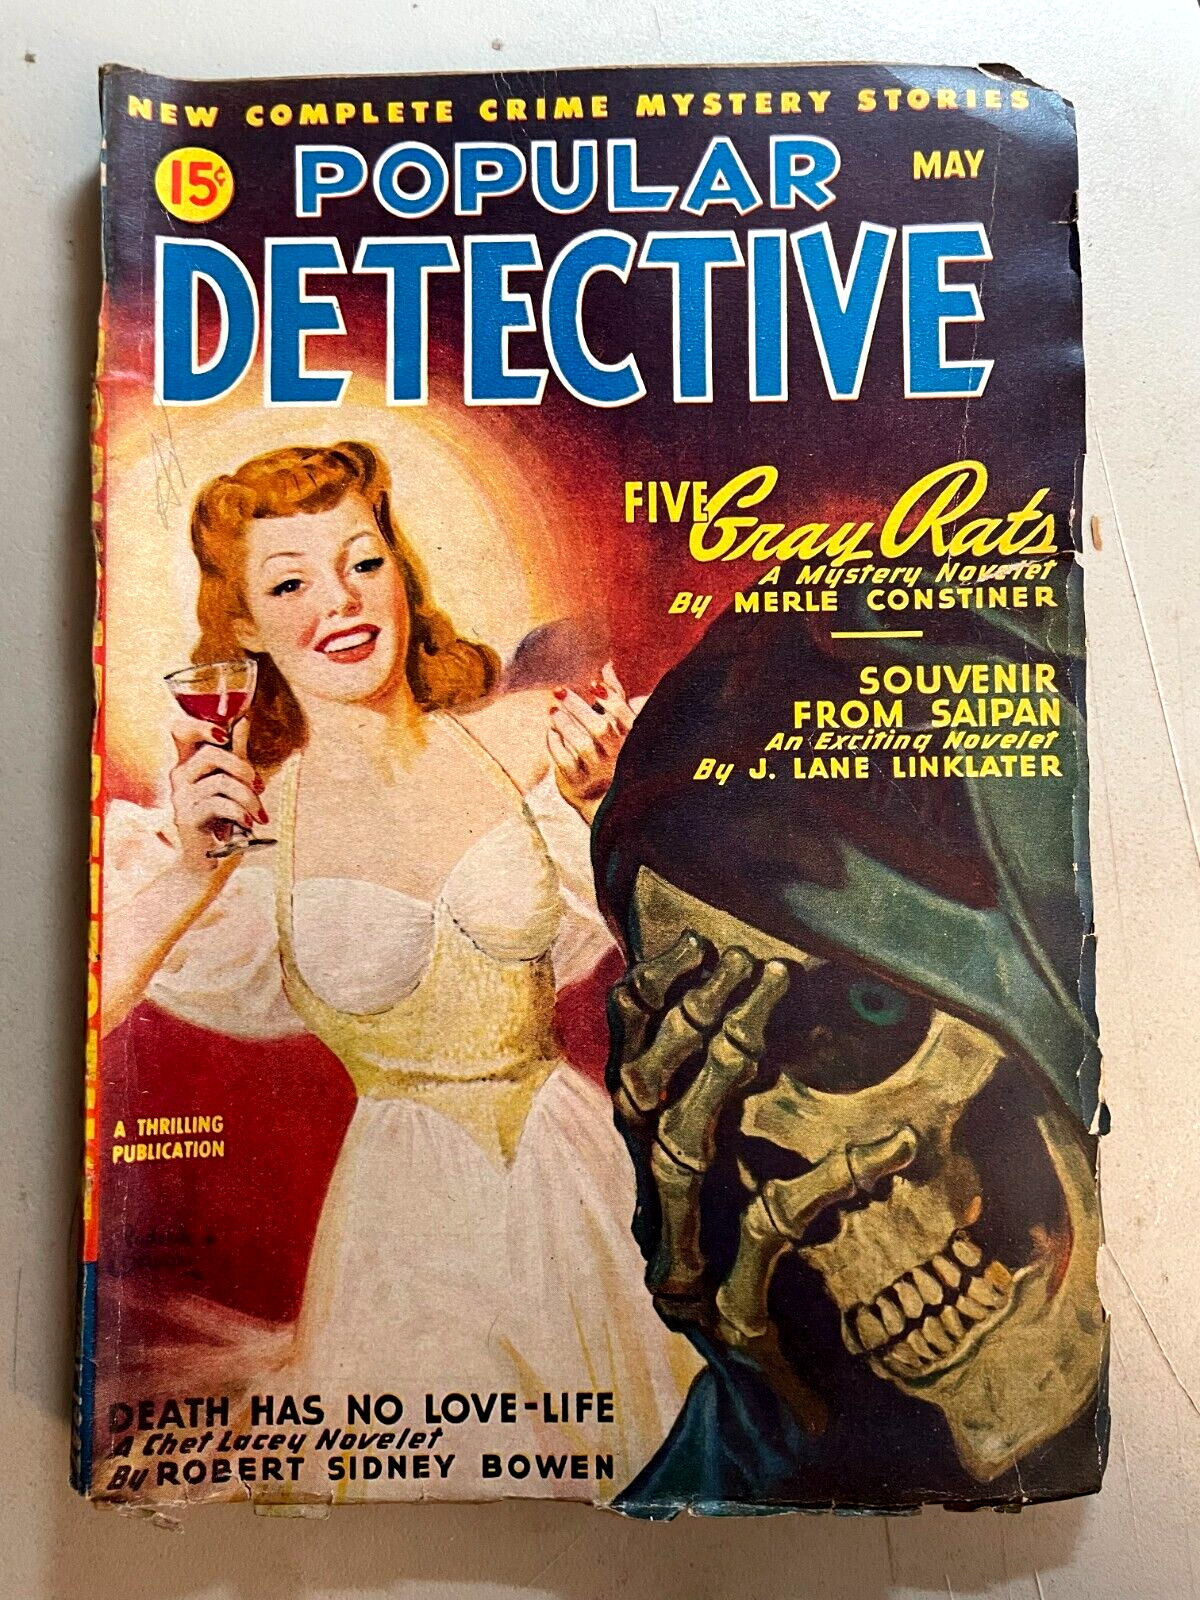 Popular Detective / May 1947 / Magazine / Pulp - CLASSIC SKULL COVER 